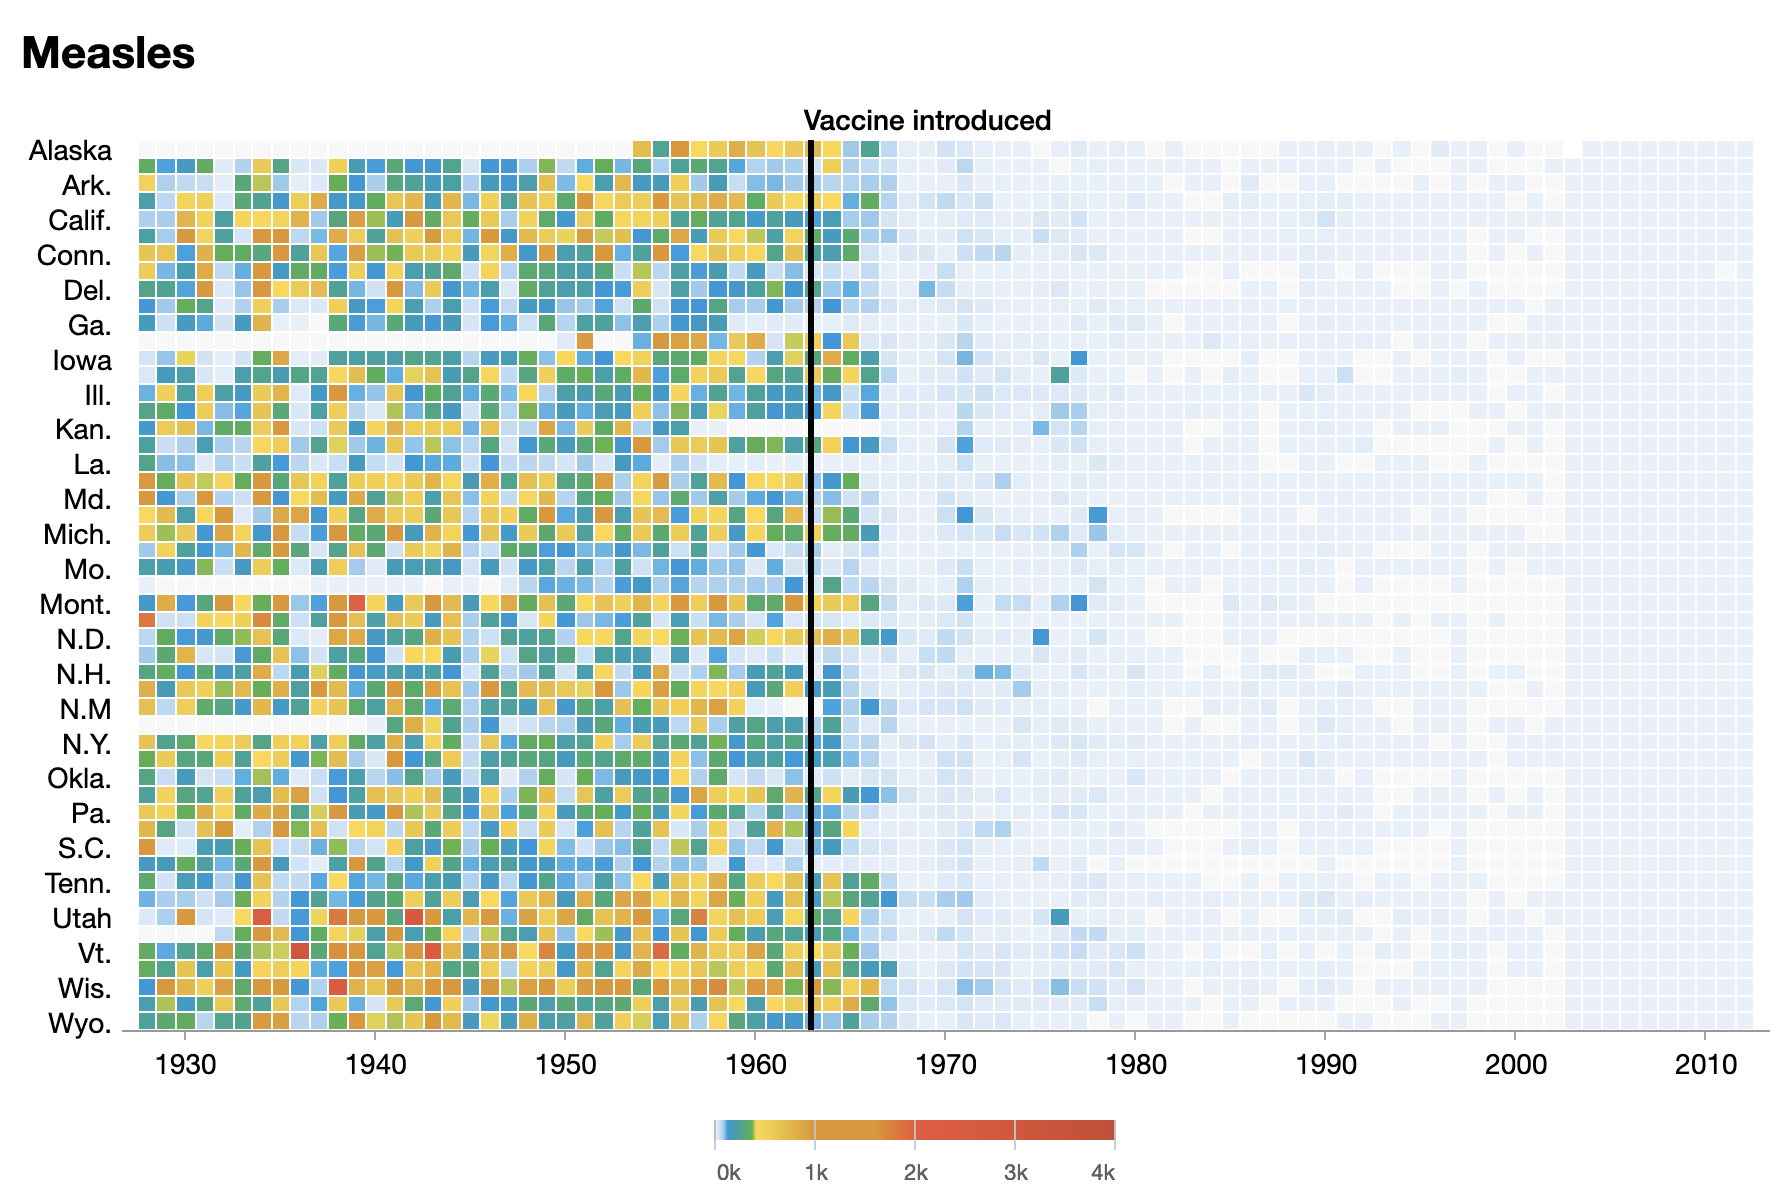 A heatmap showing the incidence of measles before and after the introduction of the vaccine